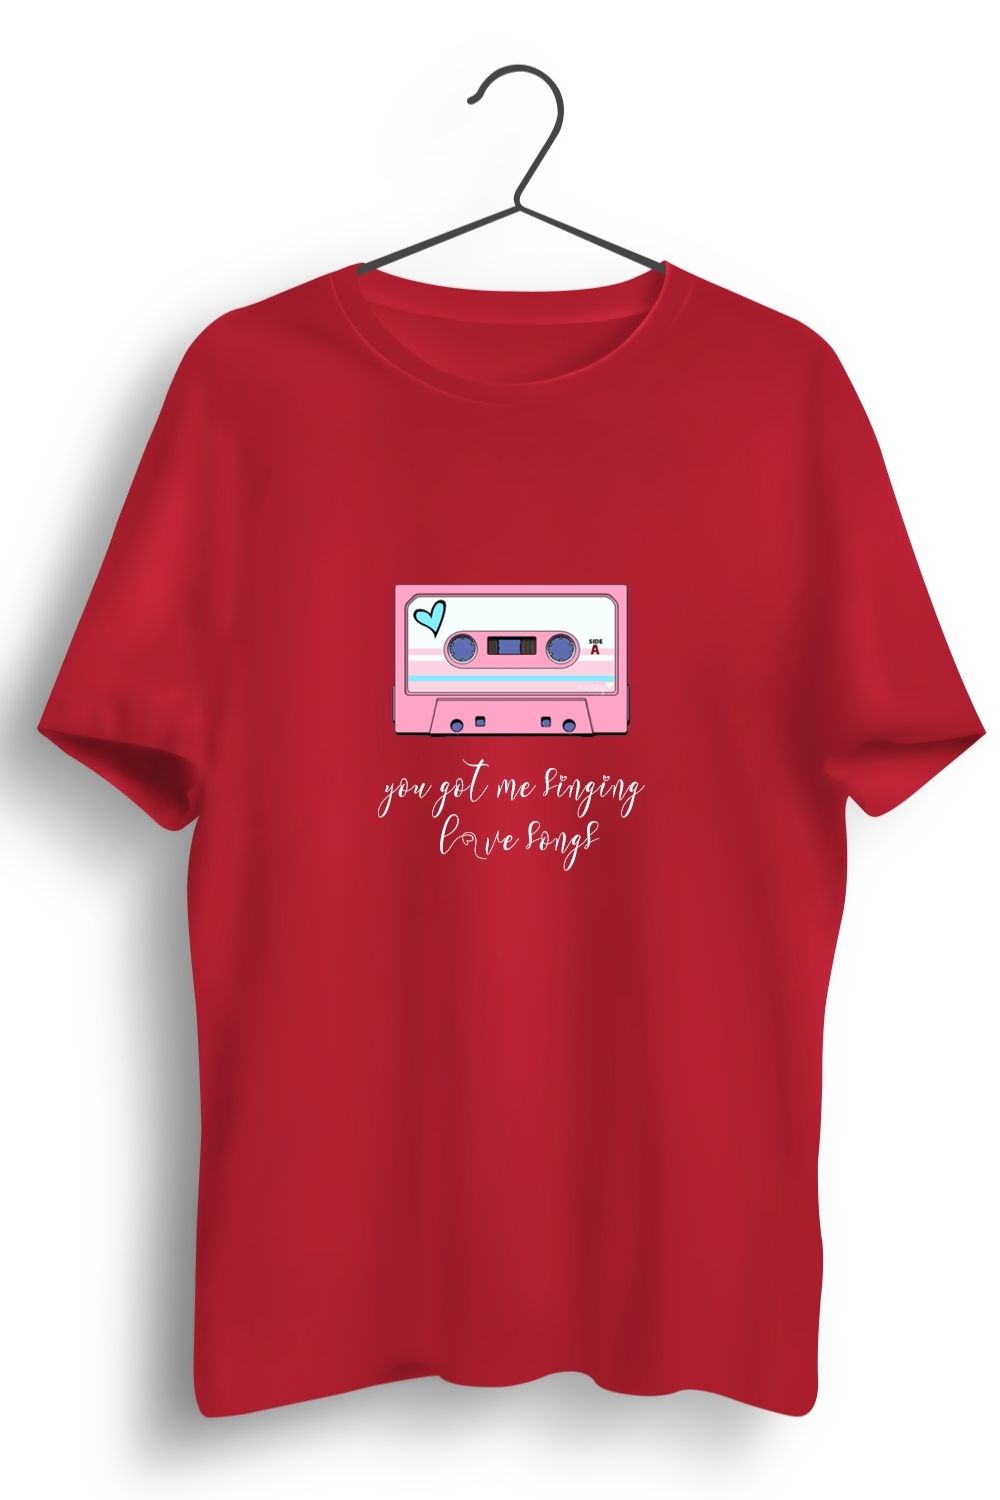 Love Song Graphic Printed Red Tshirt